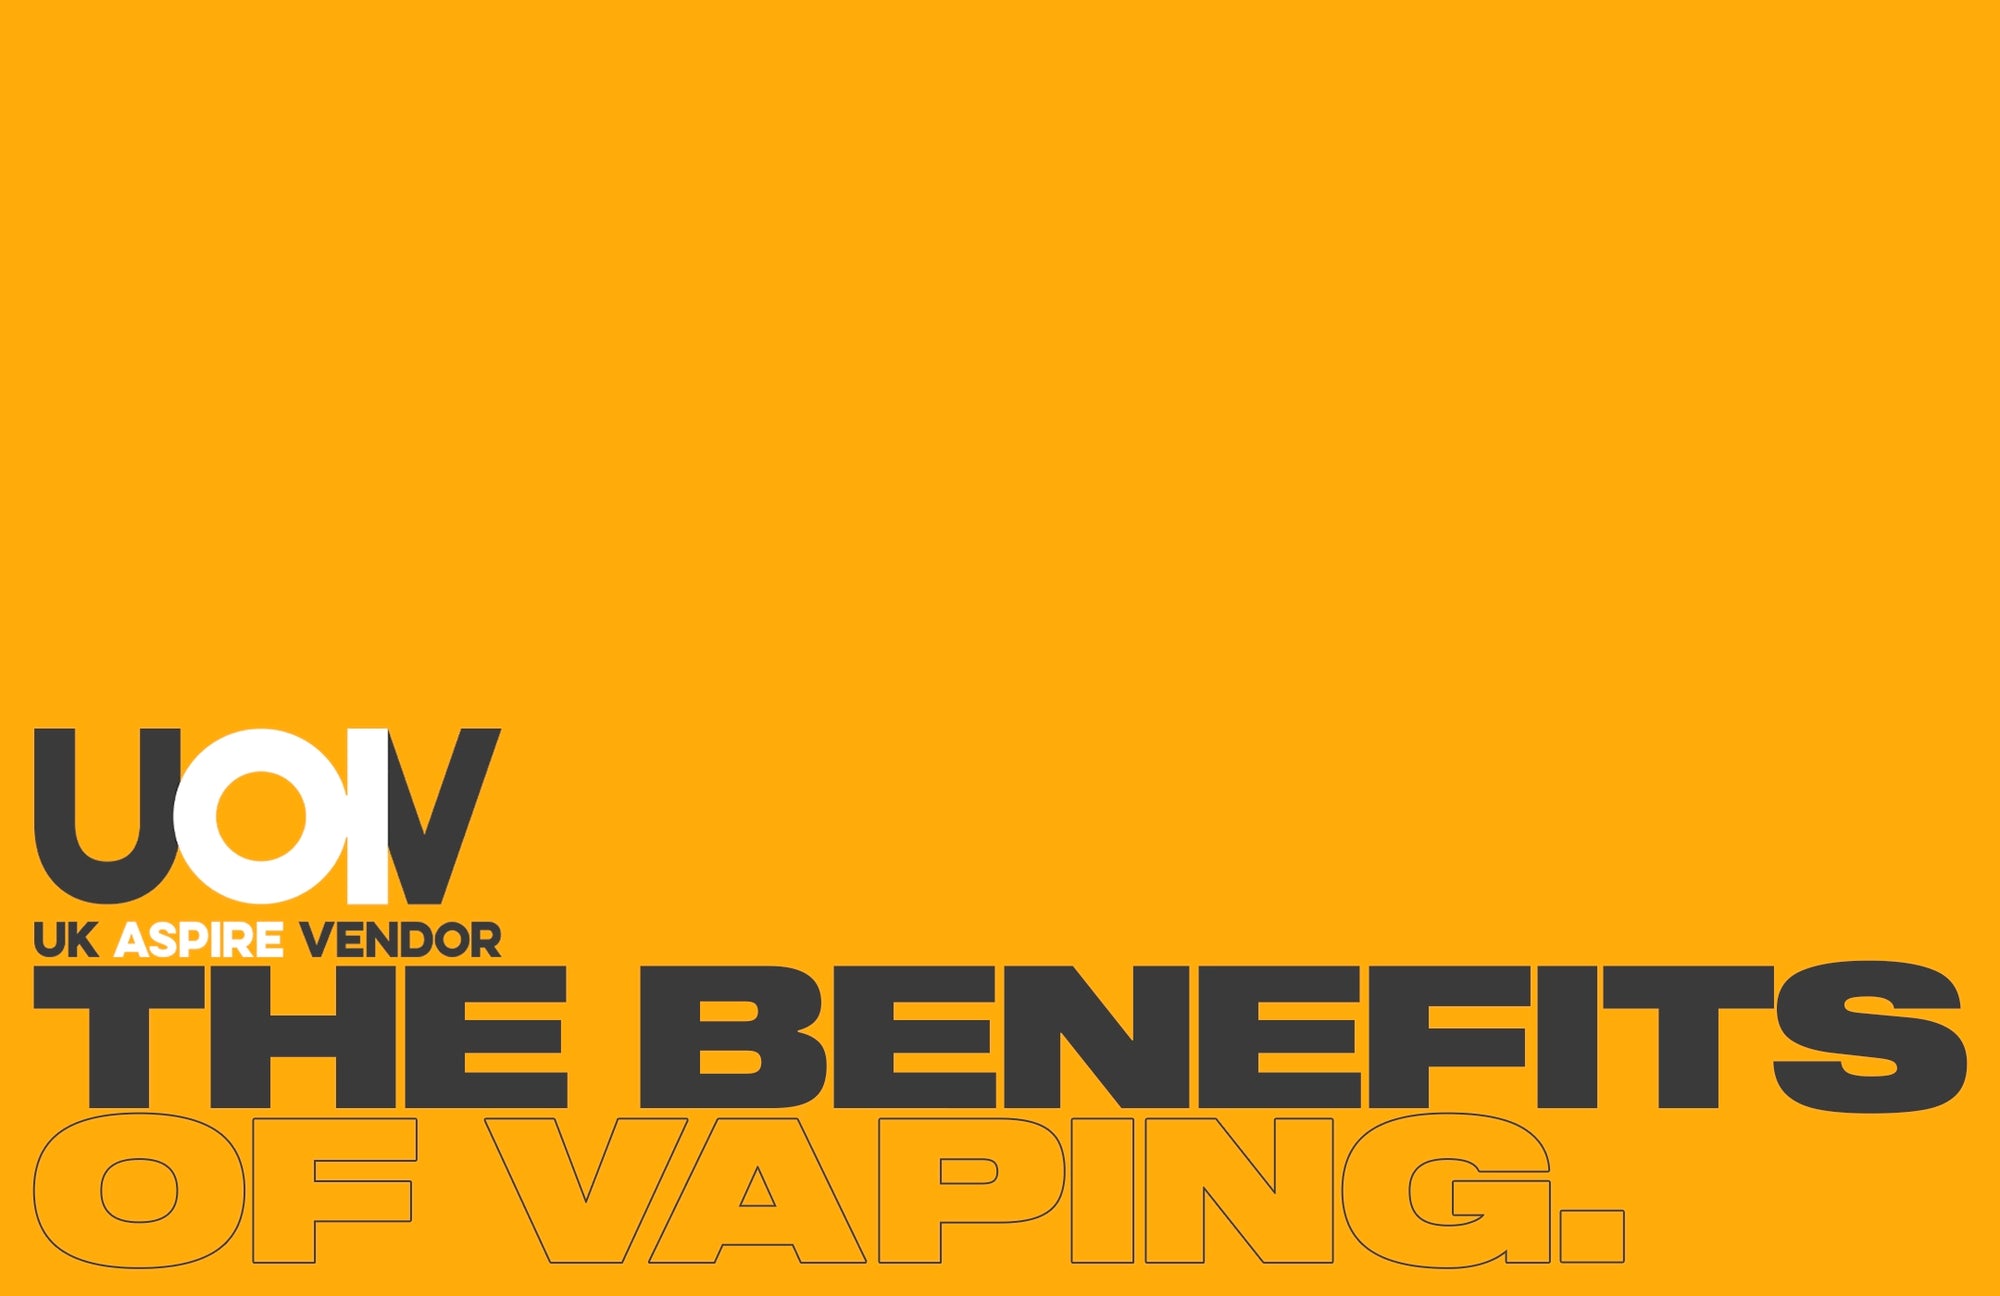 The Most Important Benefits Of Vaping & Quitting Smoking - Explained.